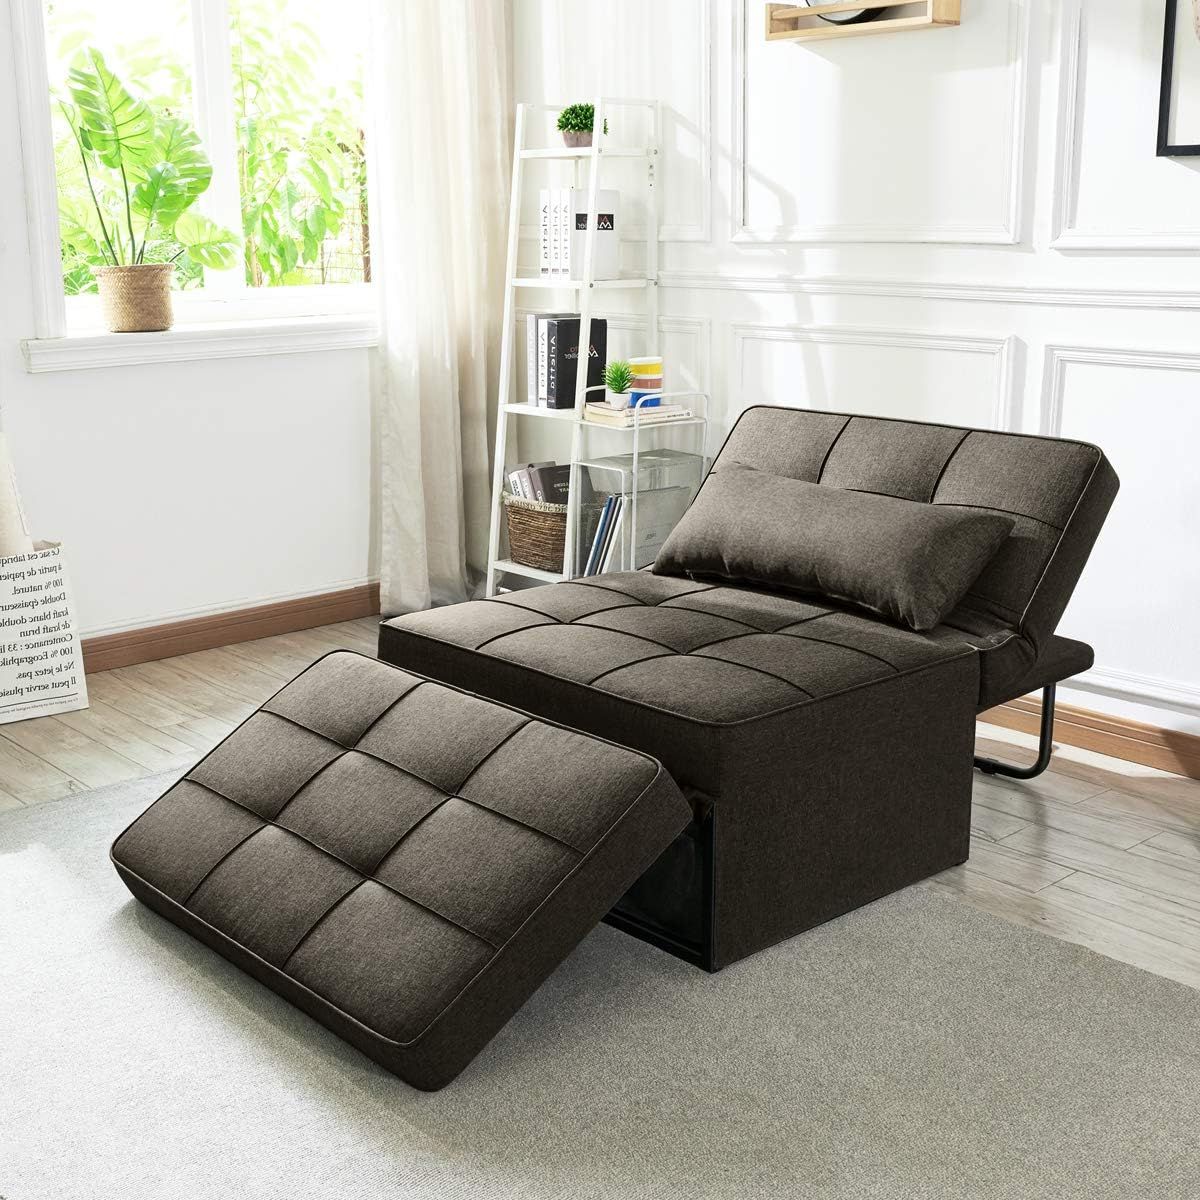 Widely Used Vonanda Sofa Bed, Convertible Chair 4 In 1 Multi Function Folding Intended For 4 In 1 Convertible Sleeper Chair Beds (Photo 2 of 15)